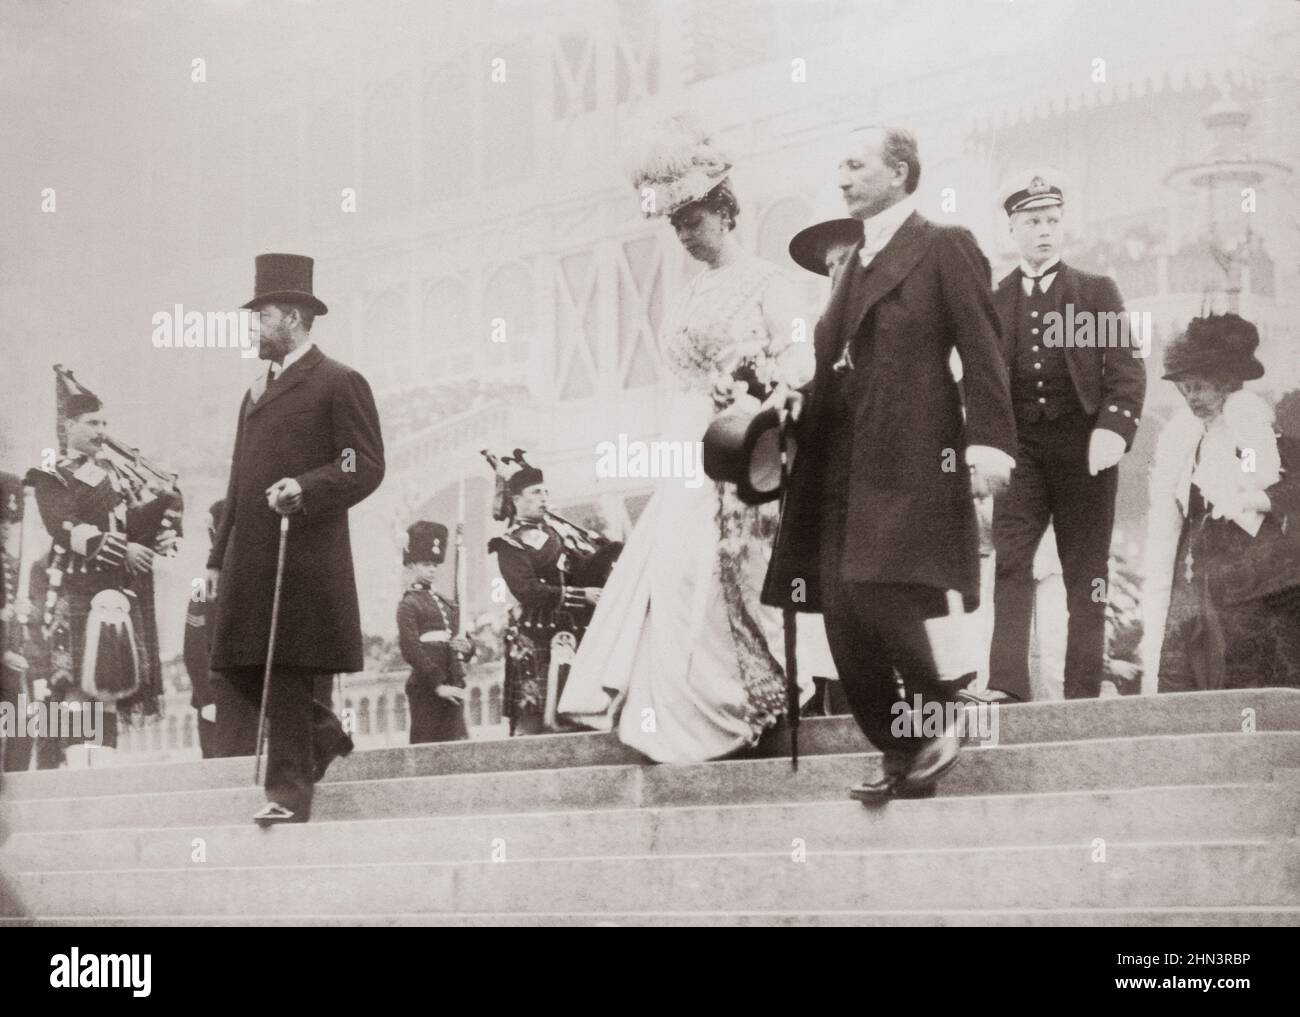 Vintage photo of King George V of the United Kingdom, Queen Mary, Earl Plymouth and the Prince of Wales (George VI) at the opening of the Festival of Stock Photo